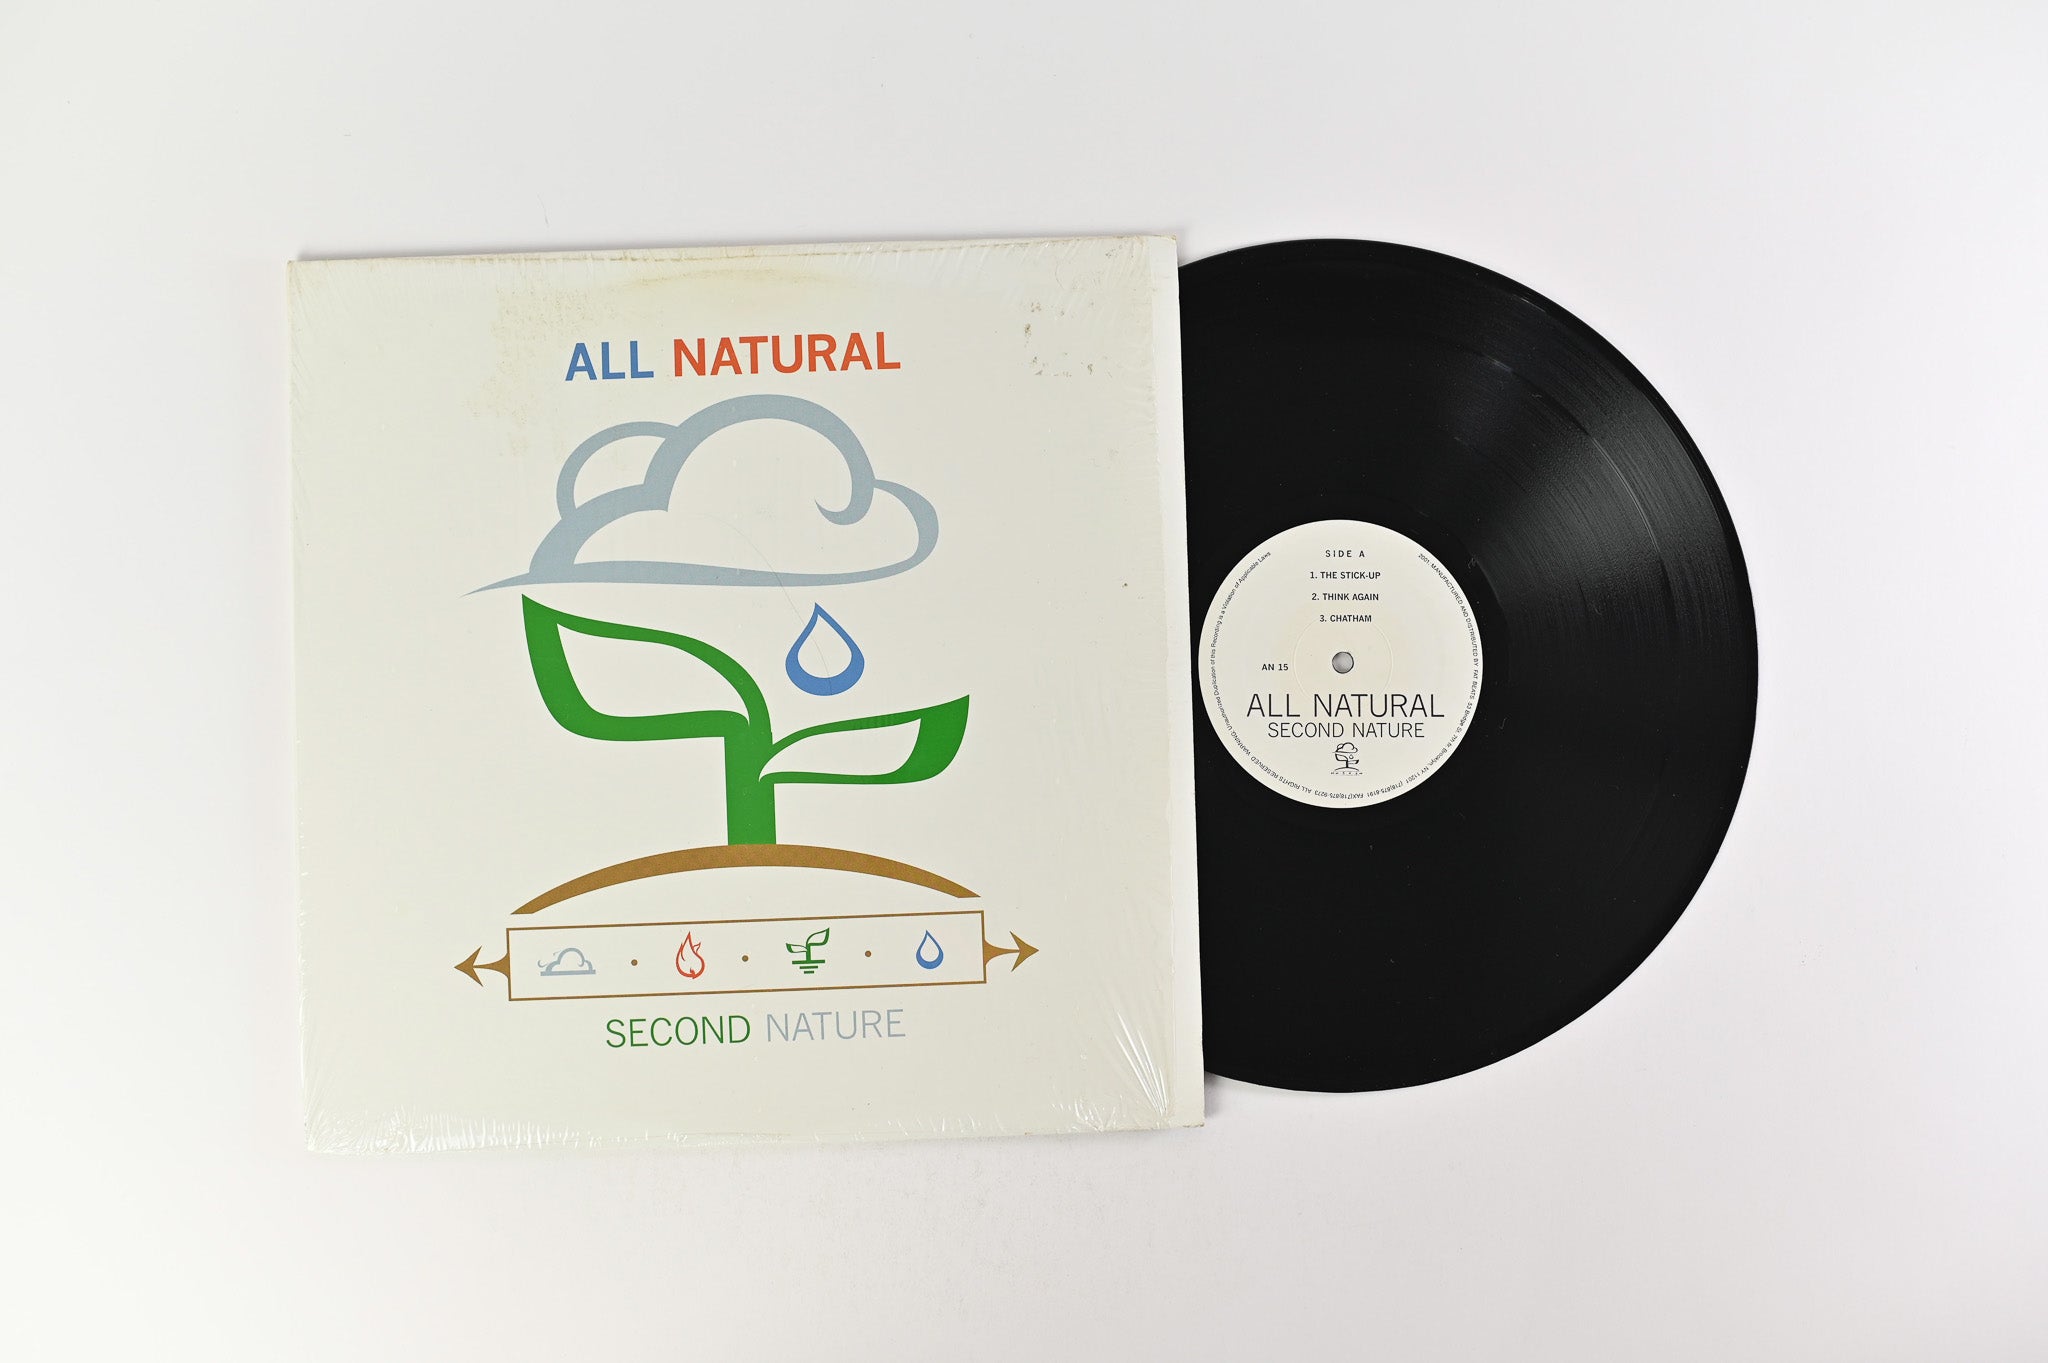 All Natural - Second Nature on All Natural Inc